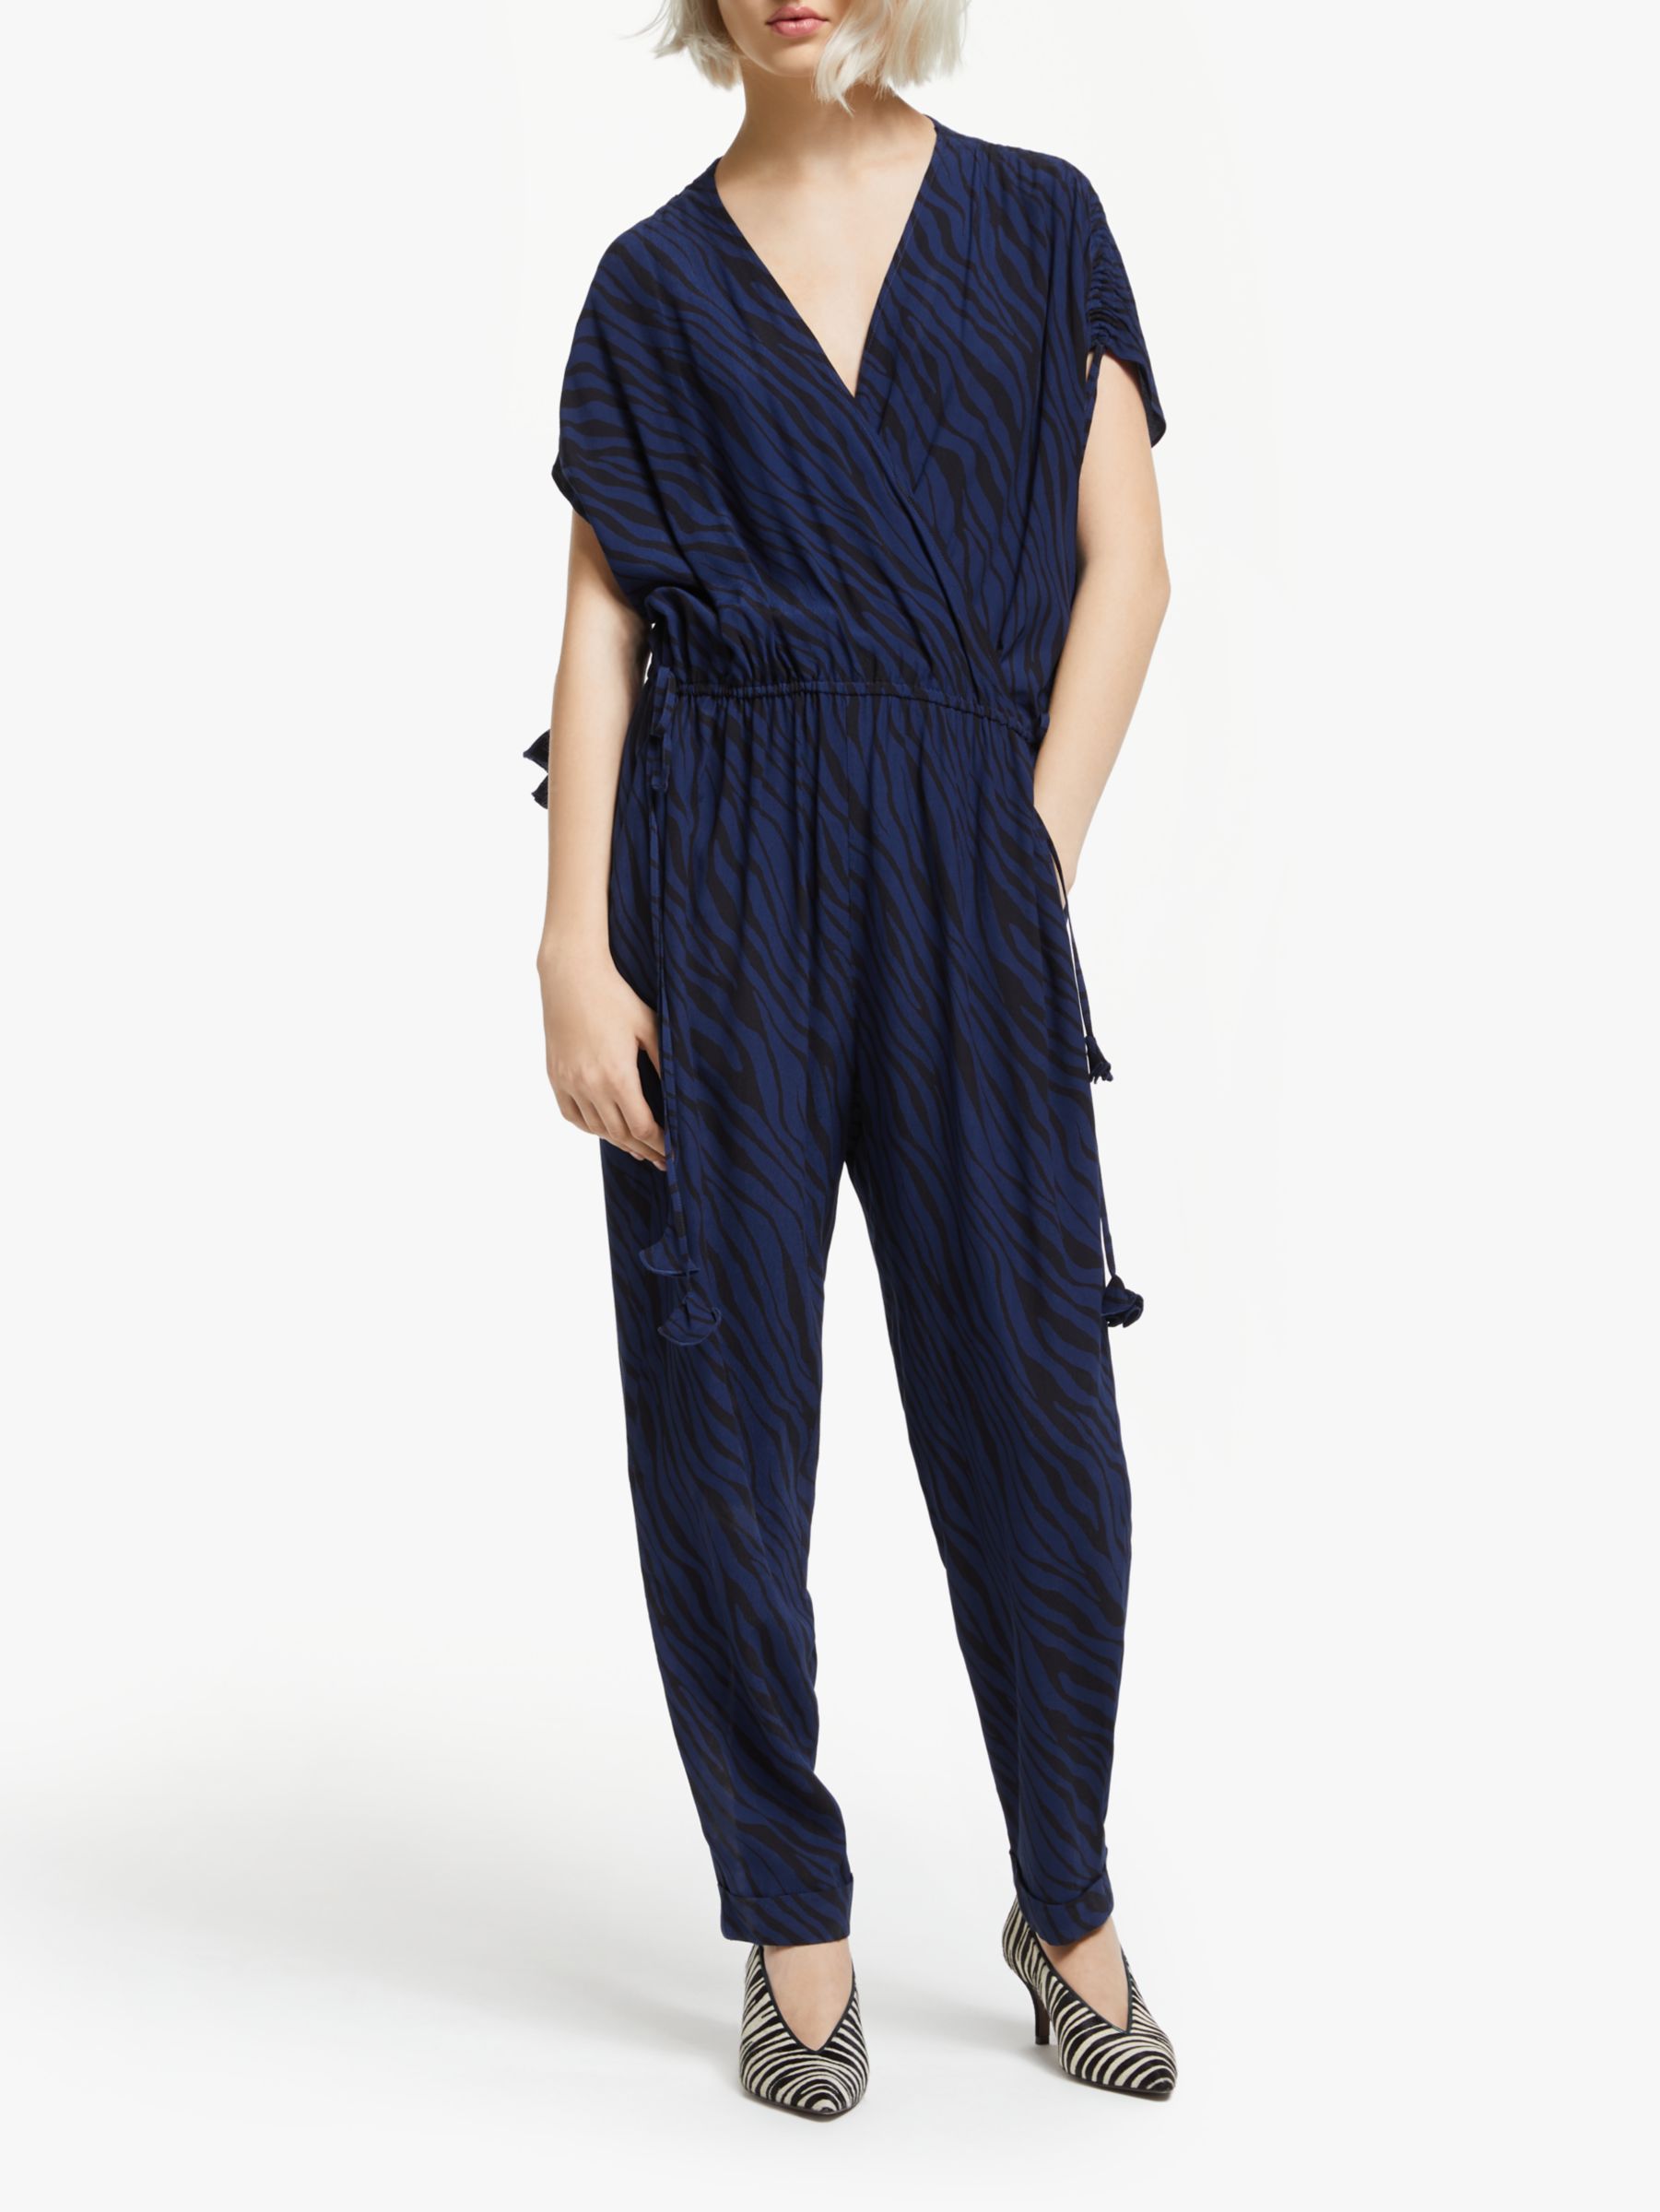 AND/OR Zebra Print Jumpsuit, Navy